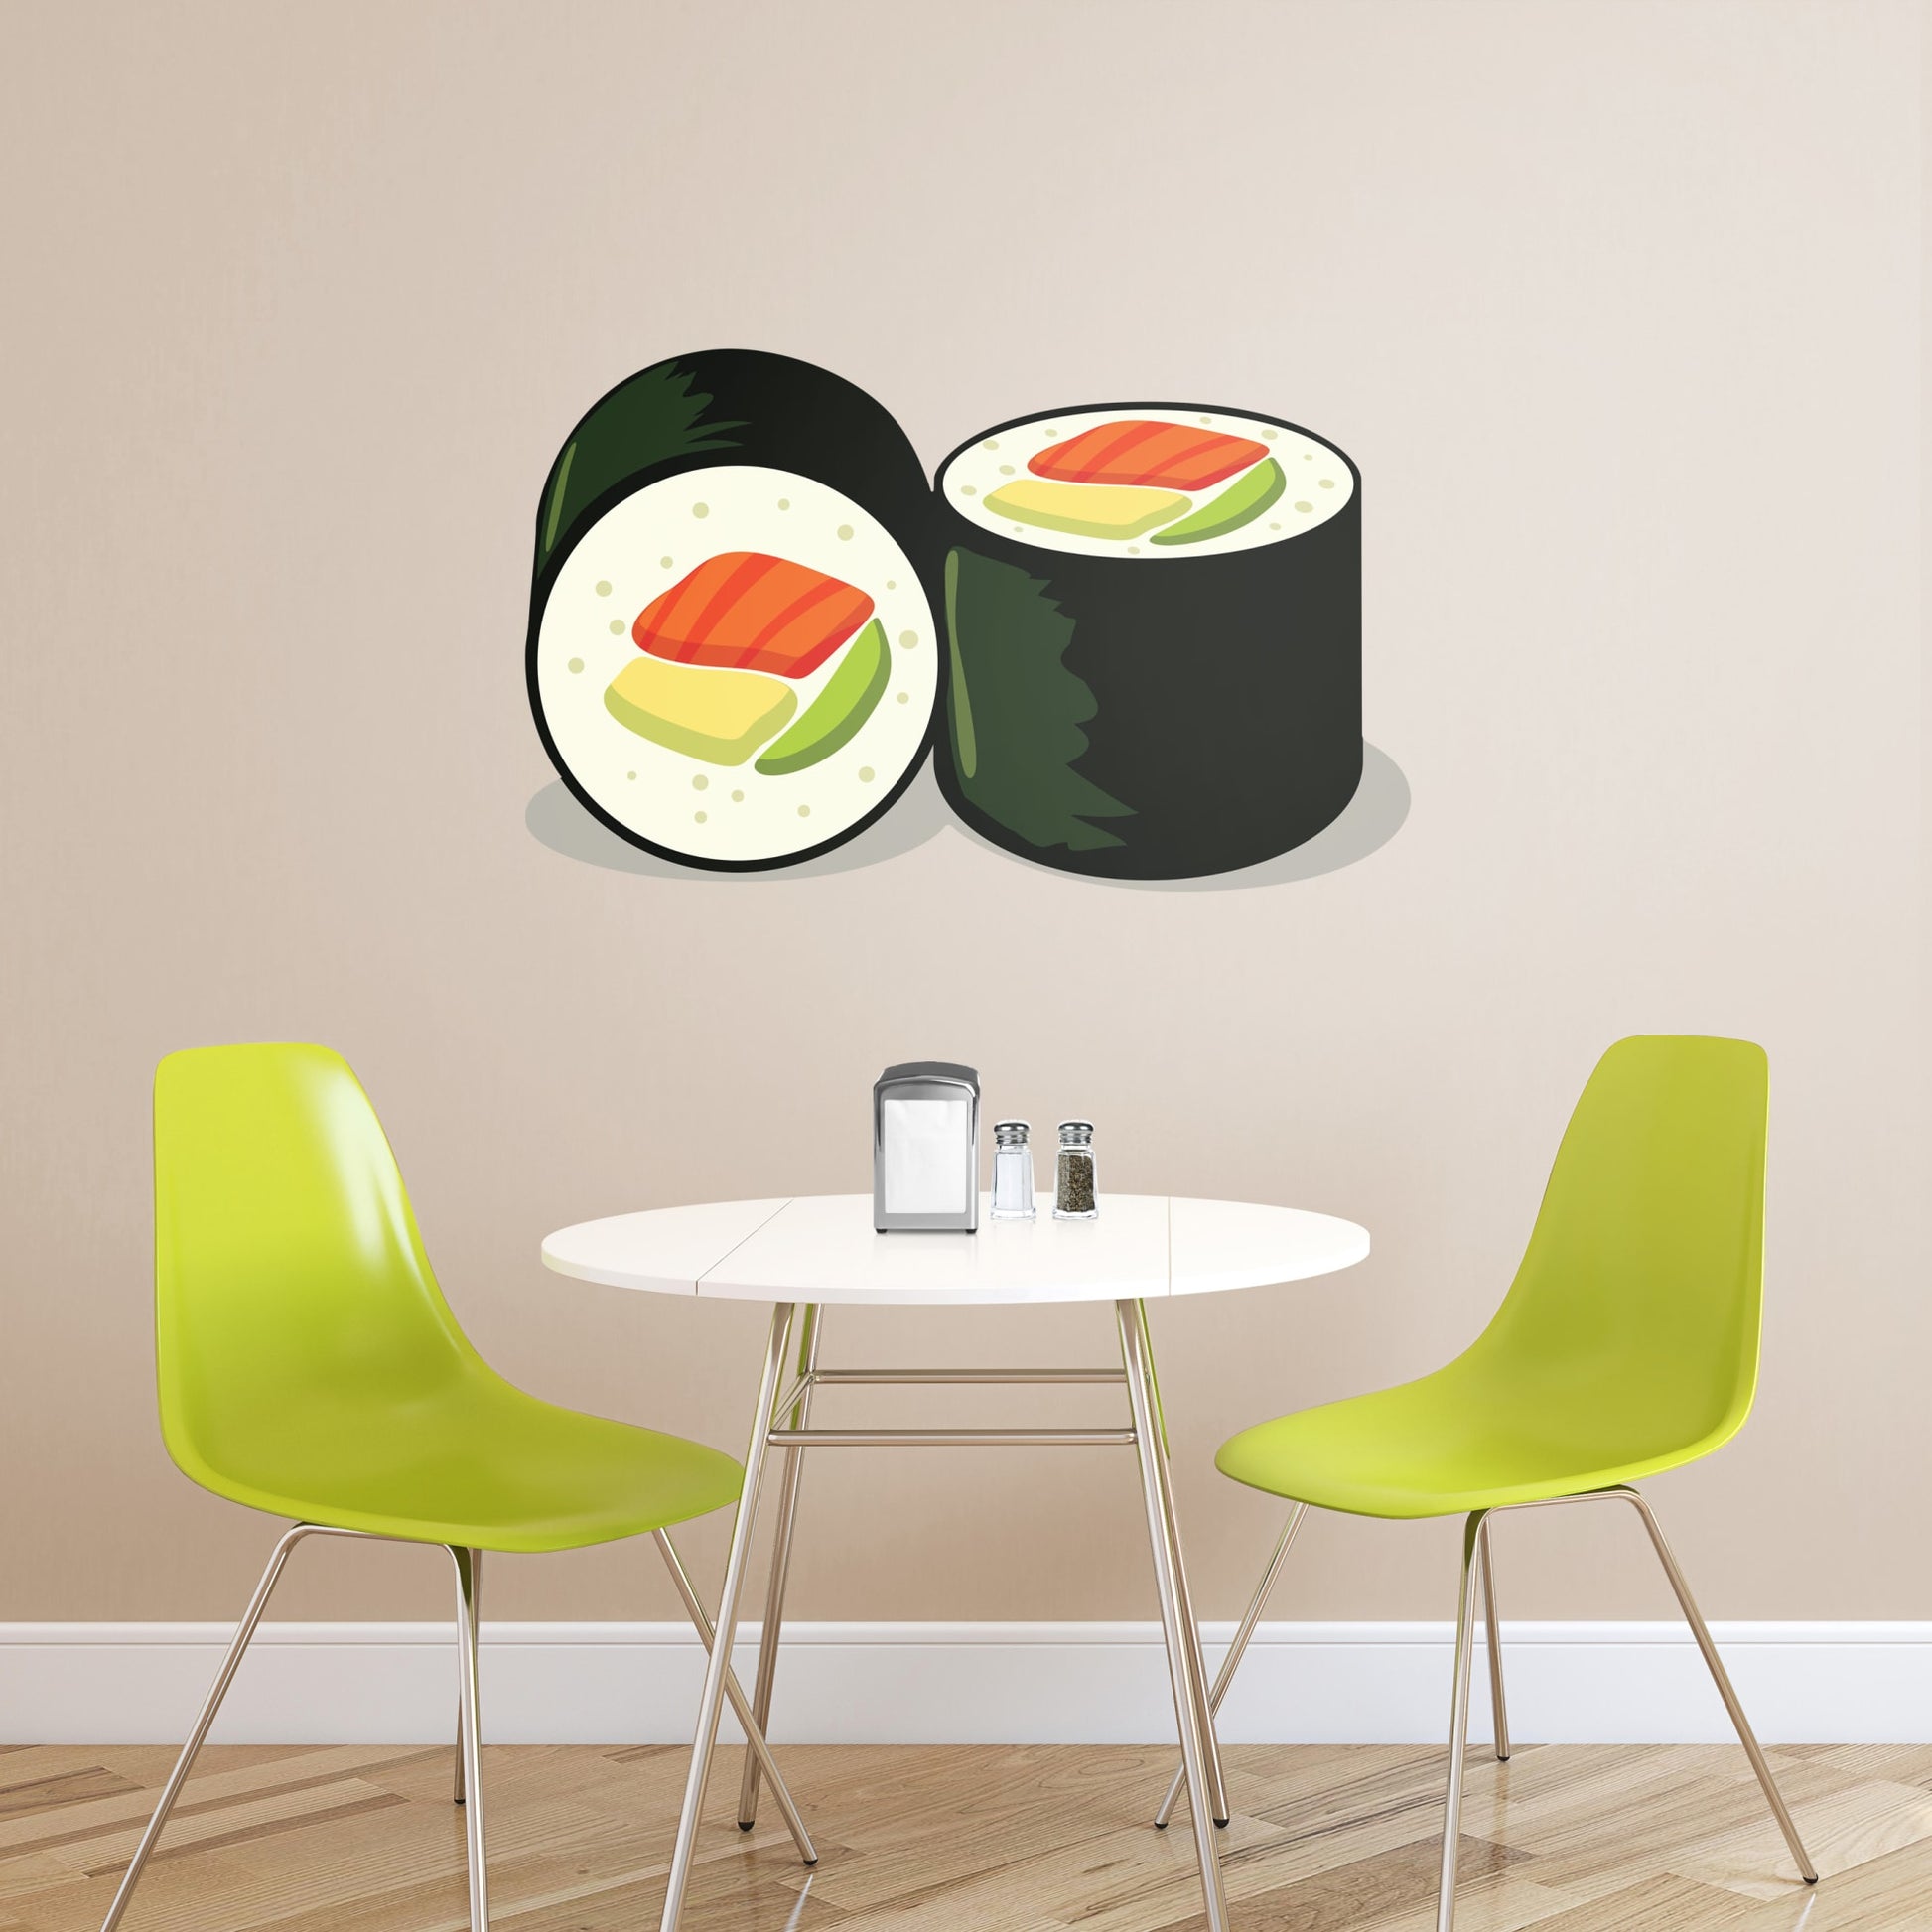 X-Large Sushi Roll + 2 Decals (33"W x 20"H)